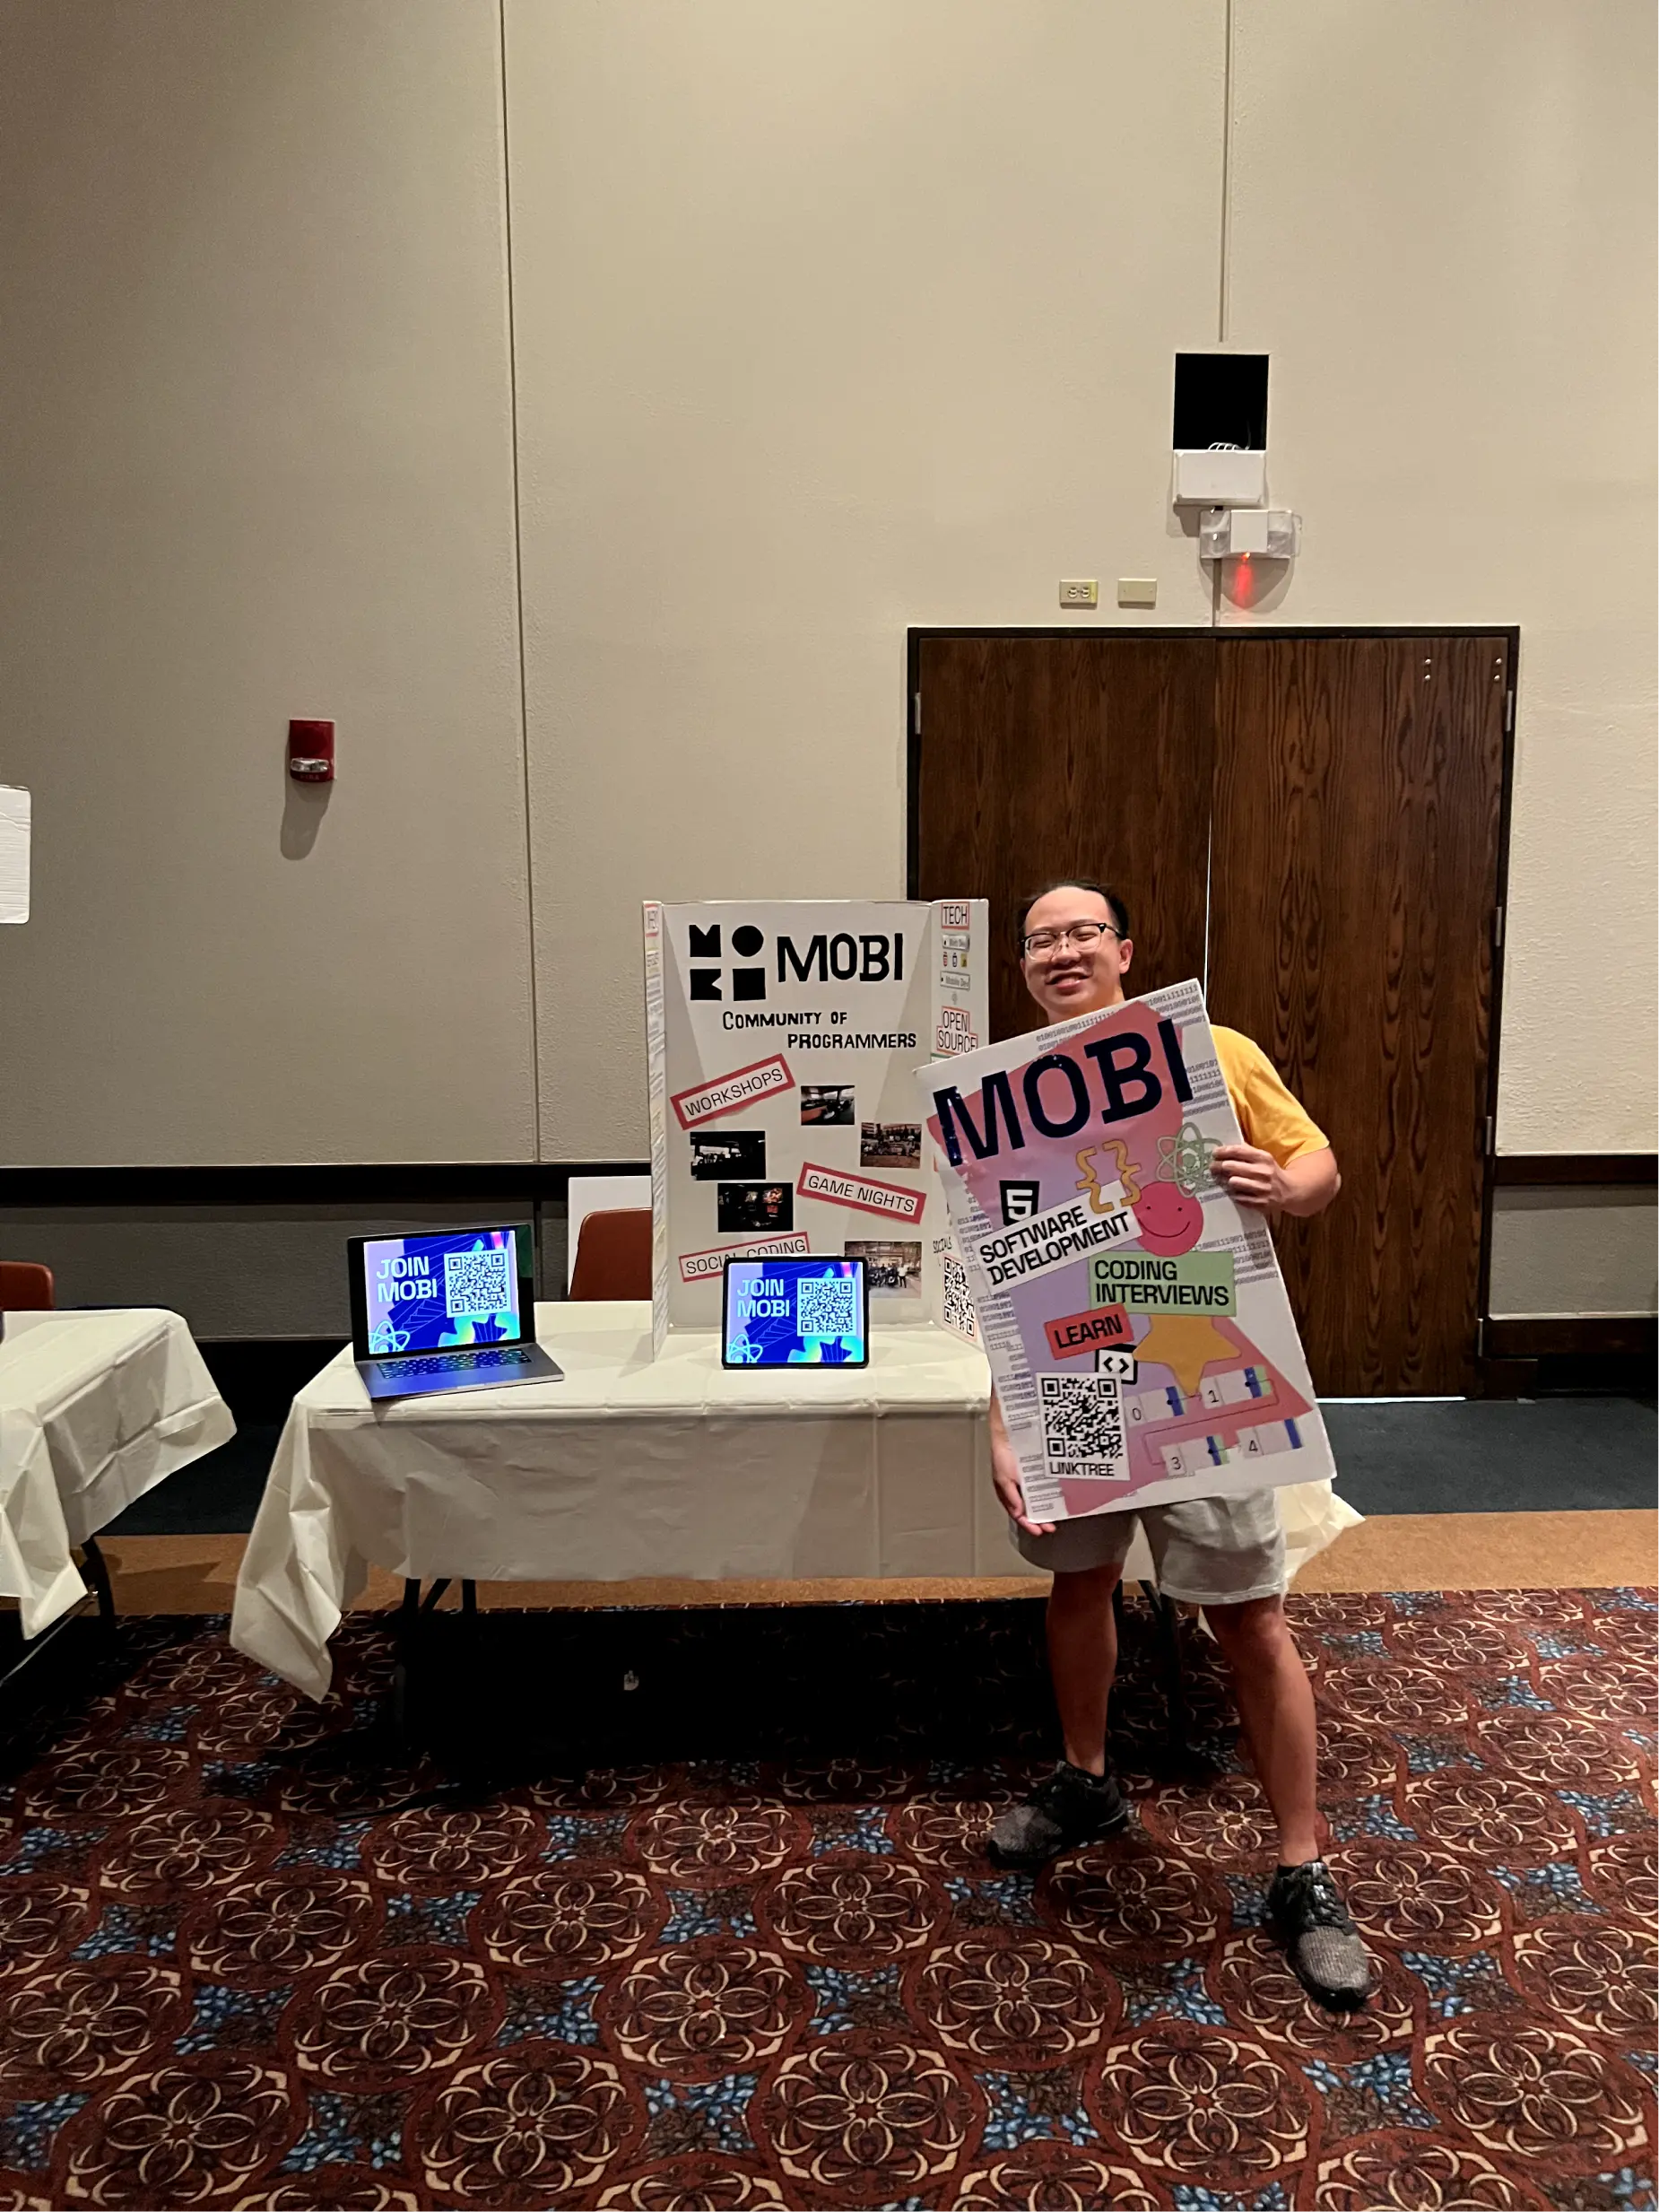 Long Nguyen standing and holding a large MOBI poster in front of a MOBI display. The display contains a laptop, iPad, and tri-board display of different graphics and information about MOBI.